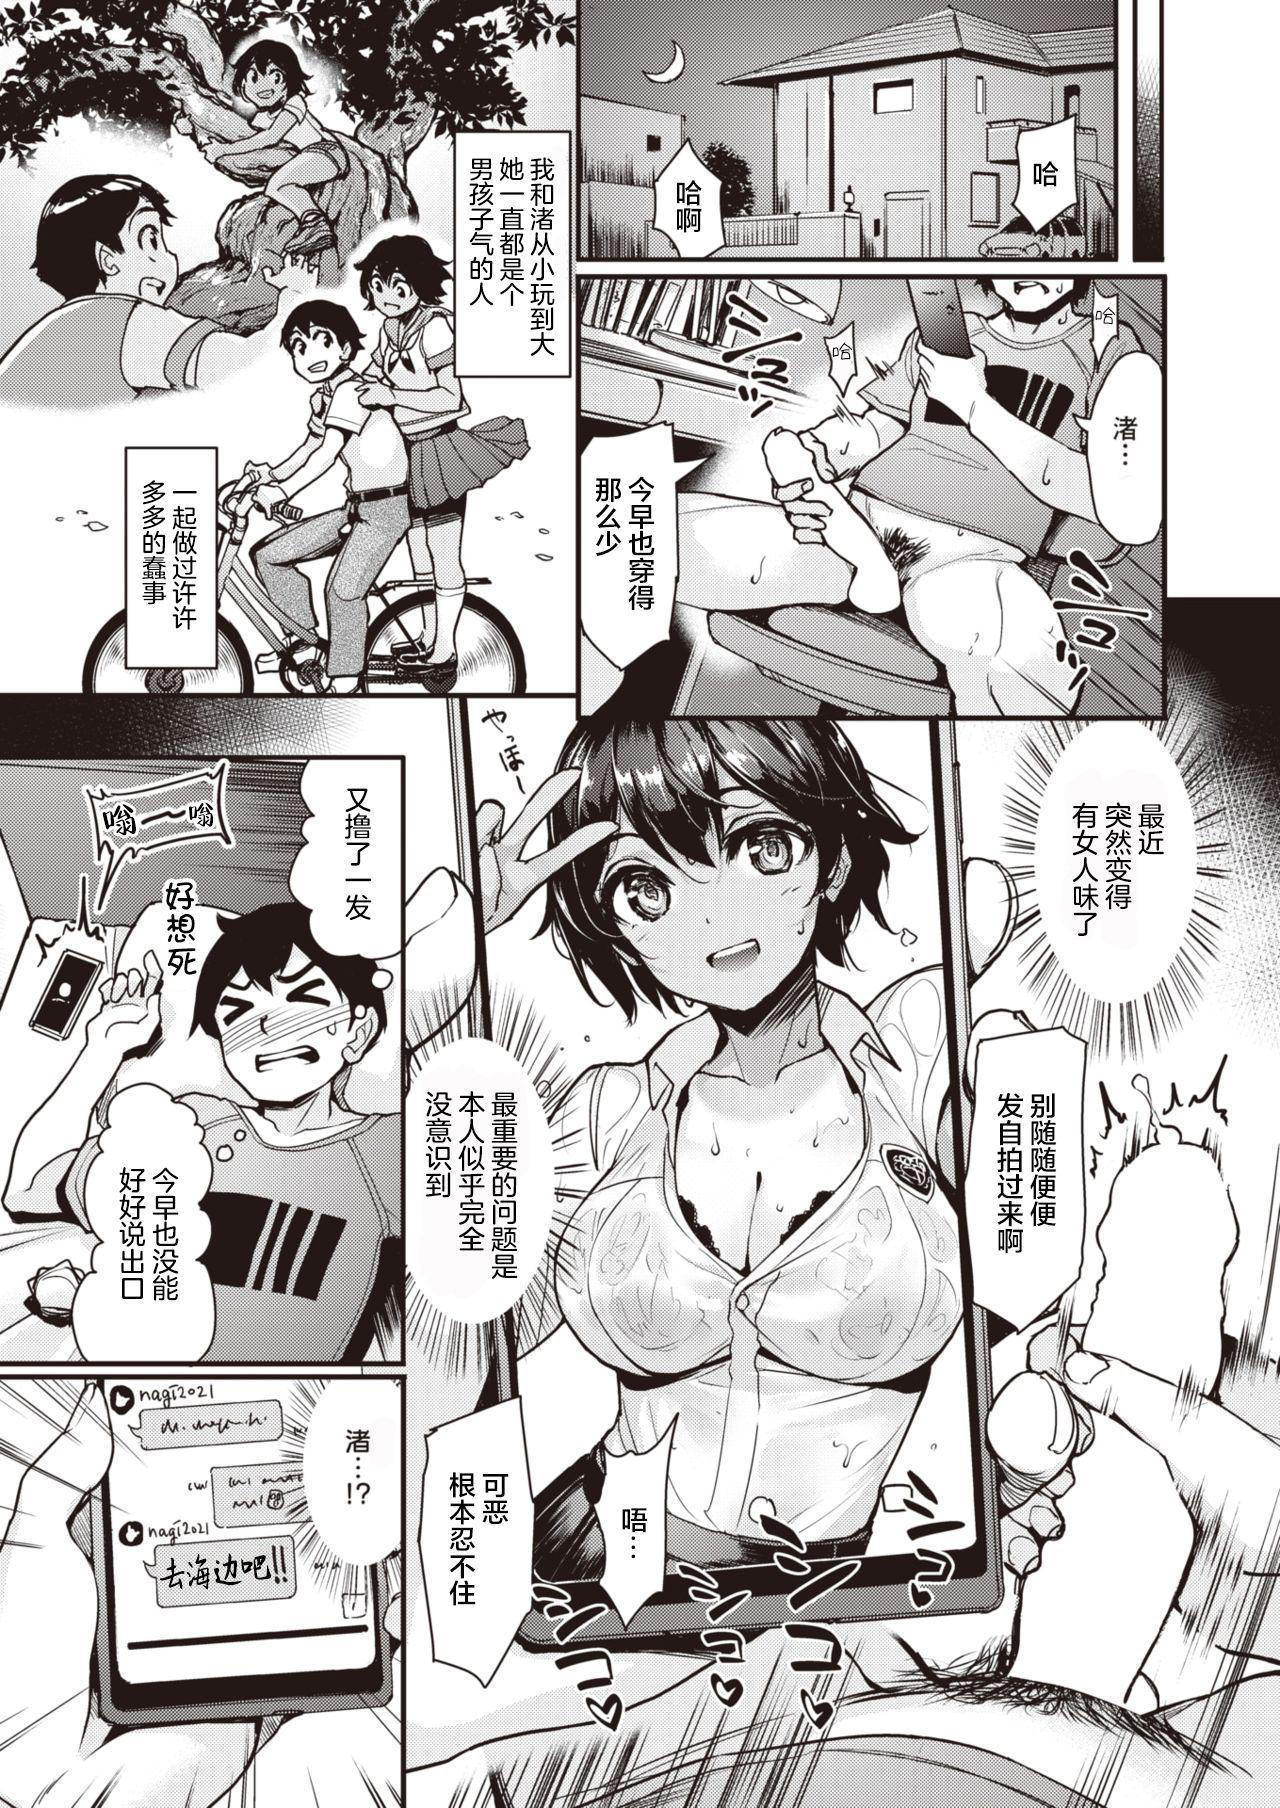 Bald Pussy Taiyou to Hiyake Ato Finger - Page 4